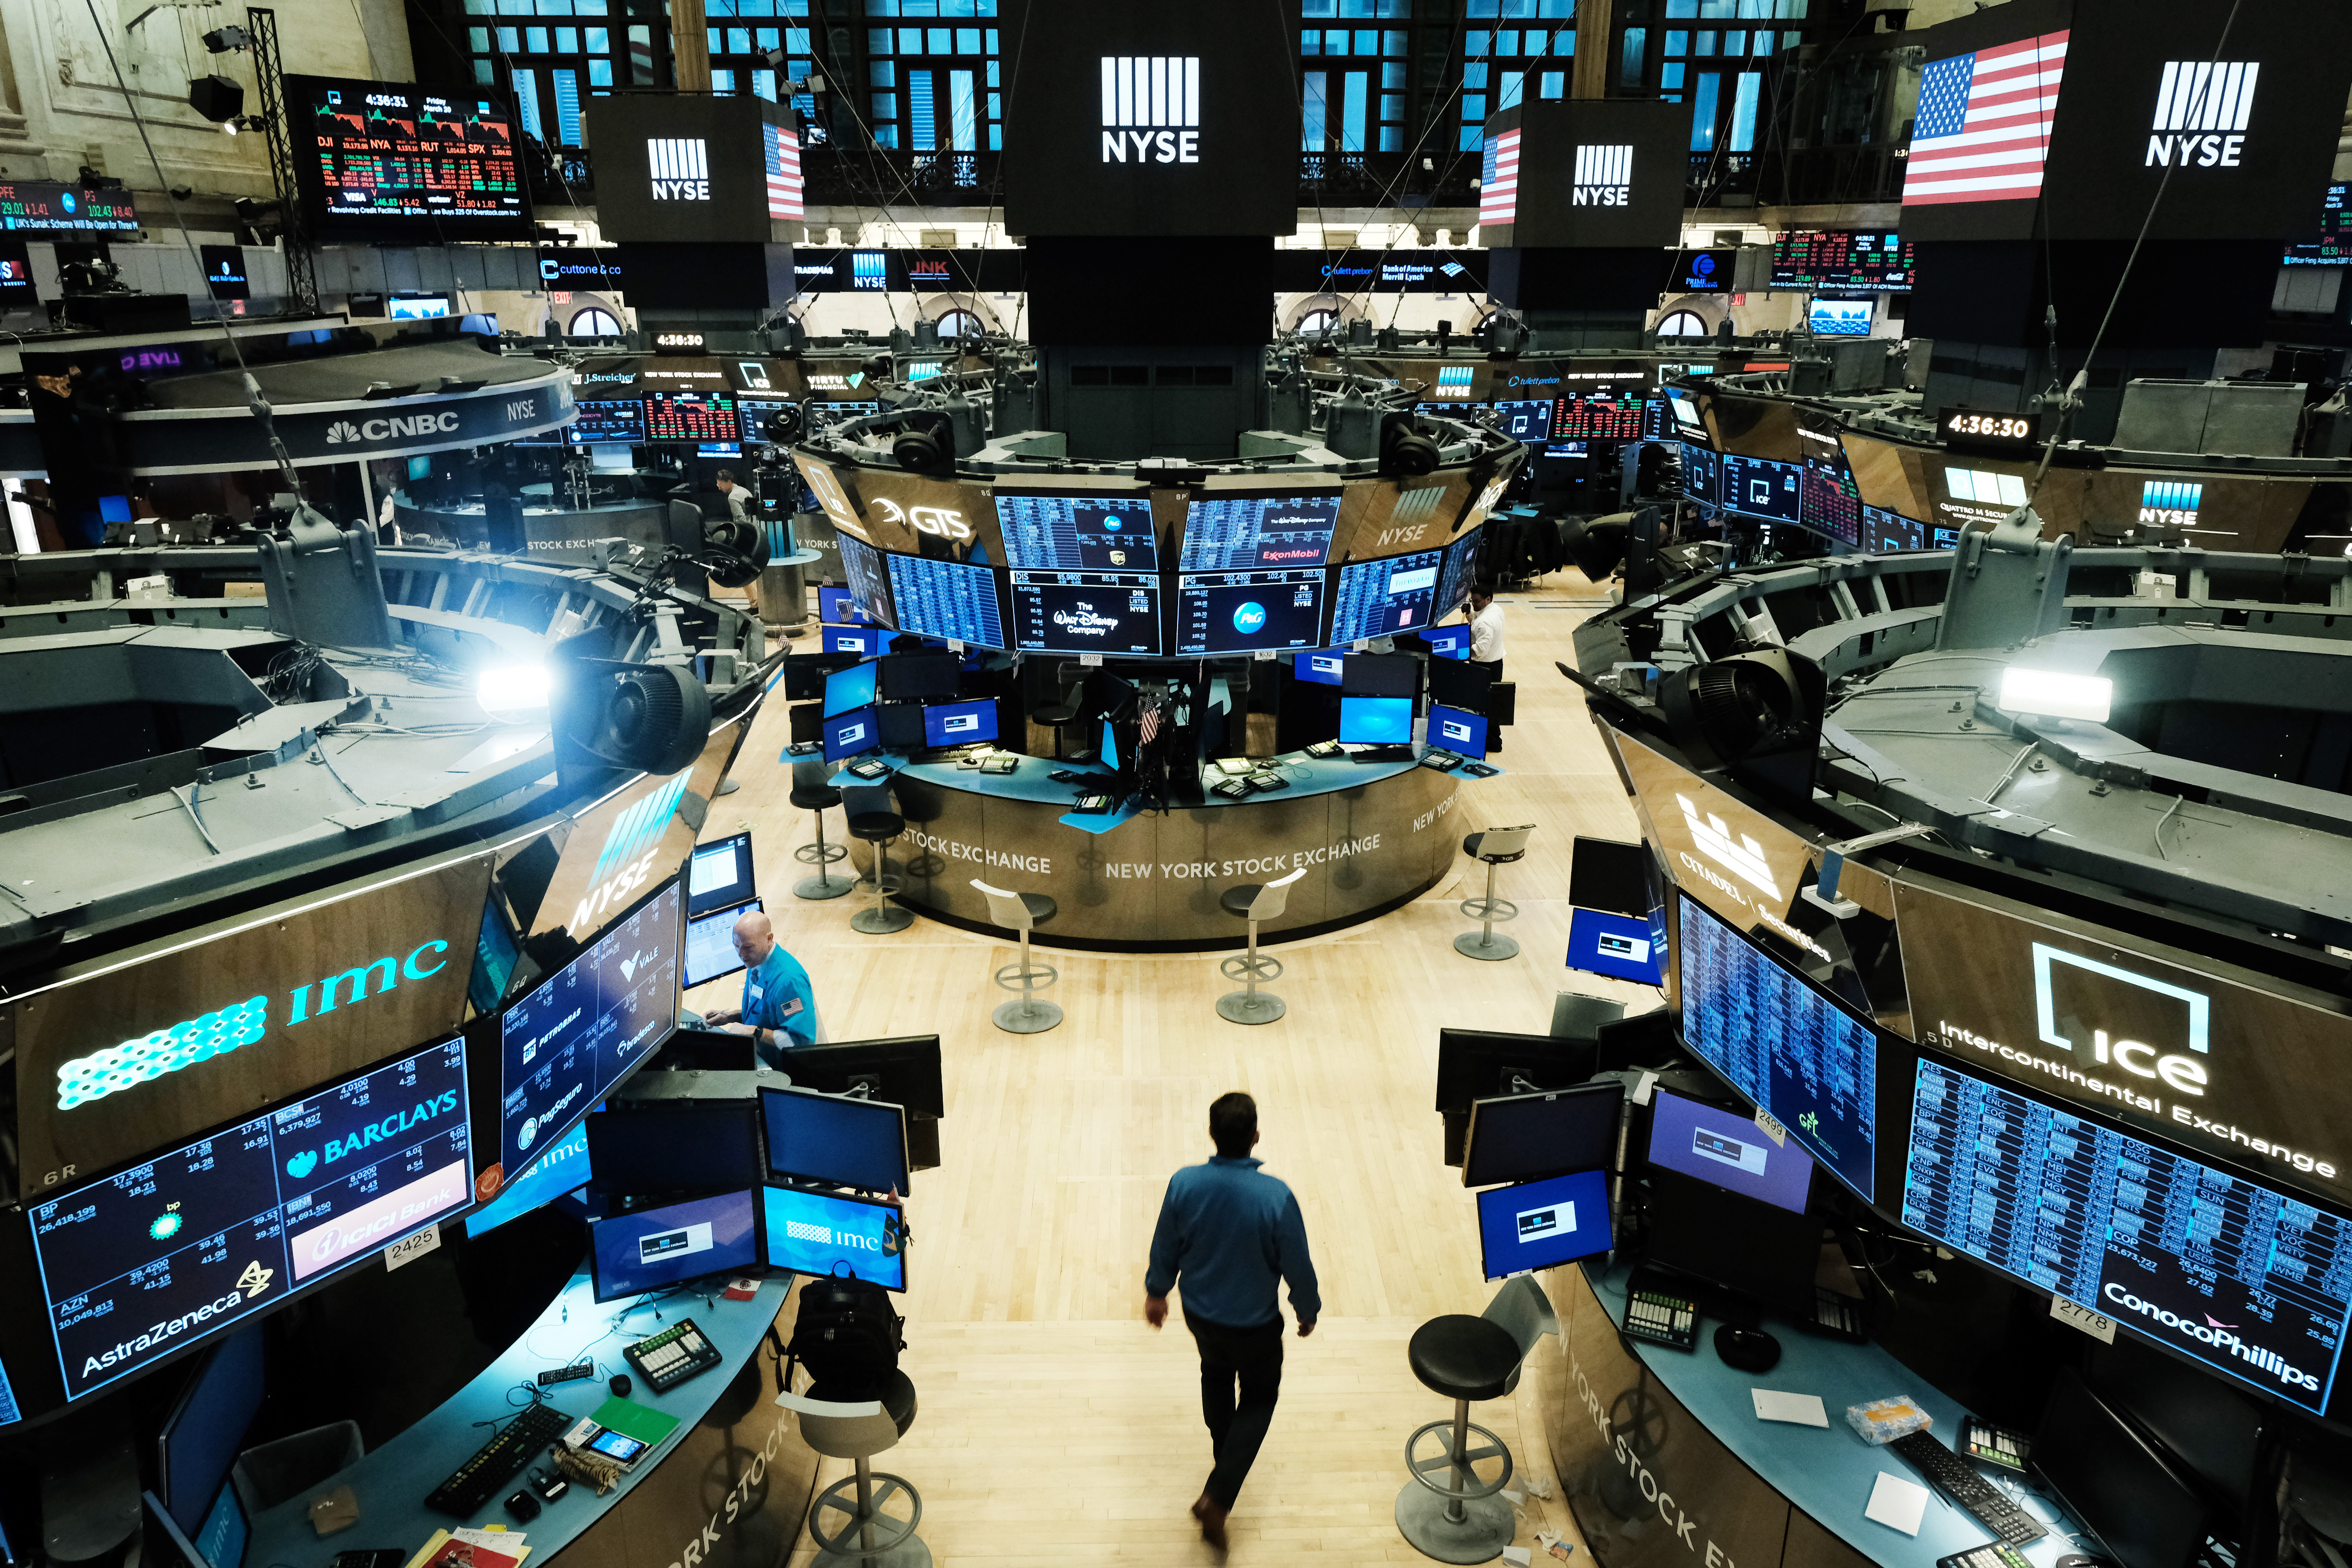 NYSE trading and IPOs won’t halt through COVID-19 says vice chairman